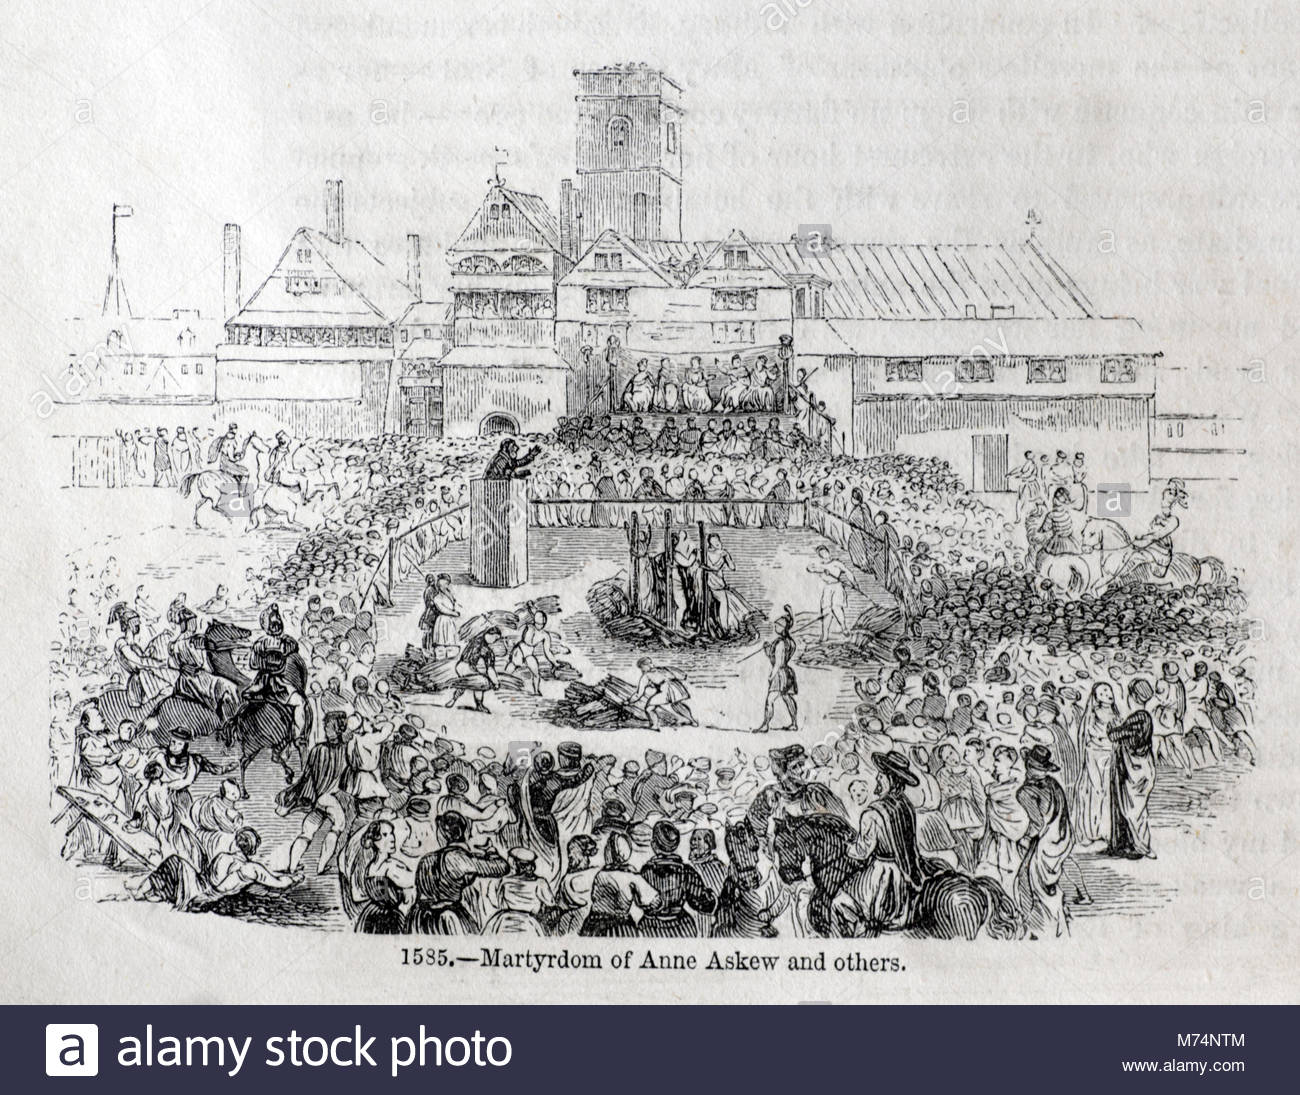 Martyrdom of Anne Askew at Smithfield London by burning at the stake in 1546, vintage engraving from 1860 Stock Photo